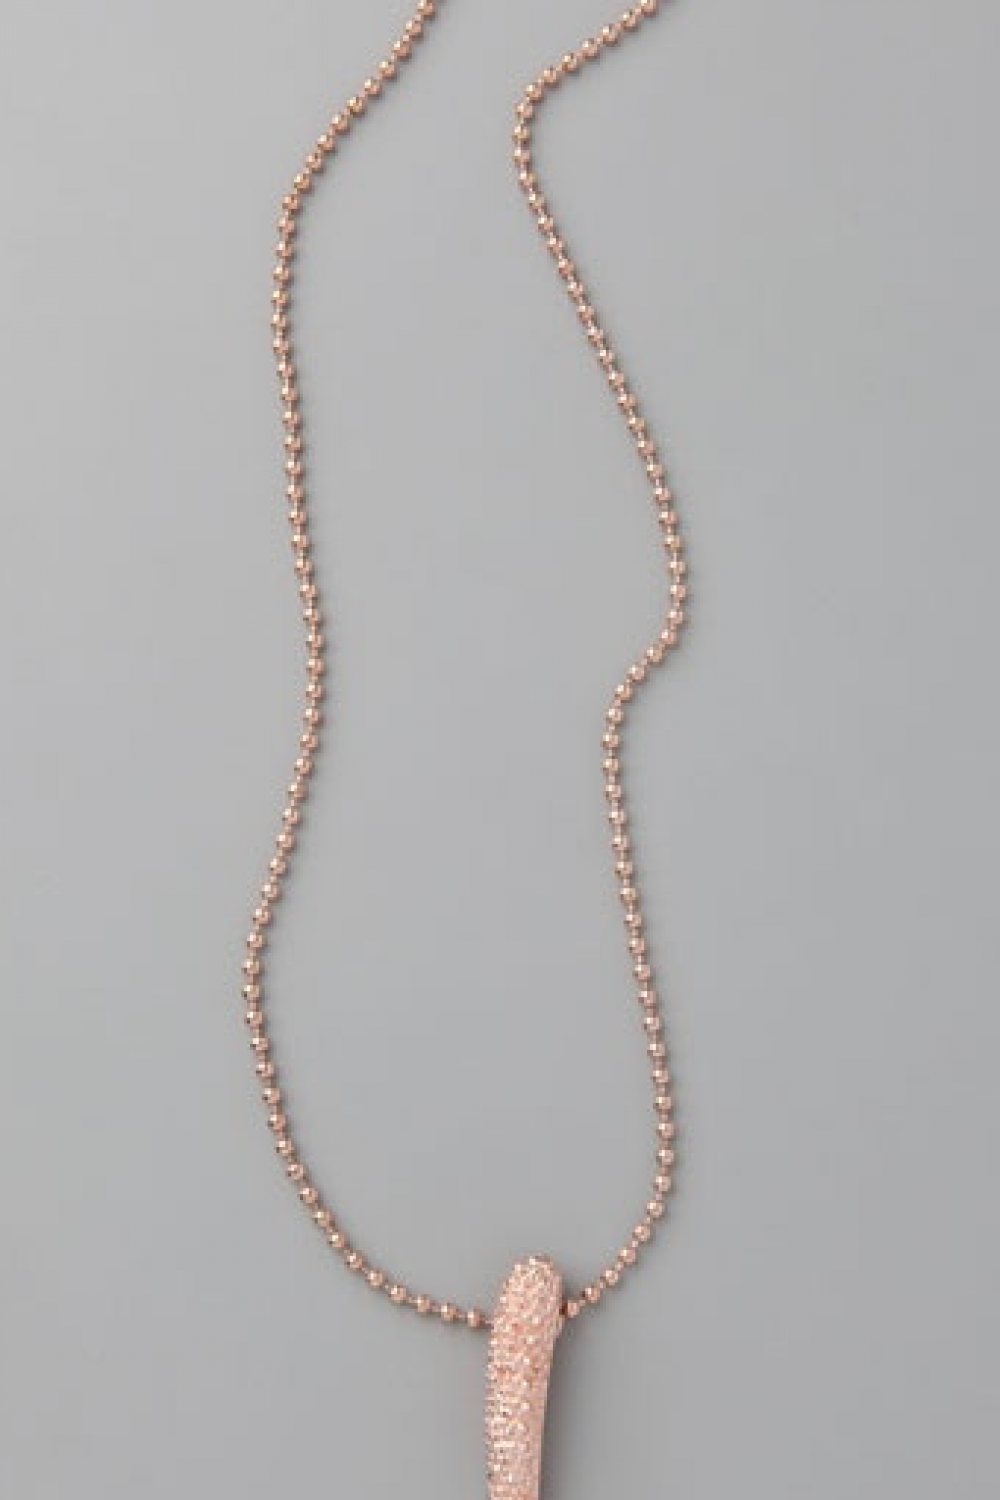 The Made Her Think Necklace, Exclusively at Shopbop